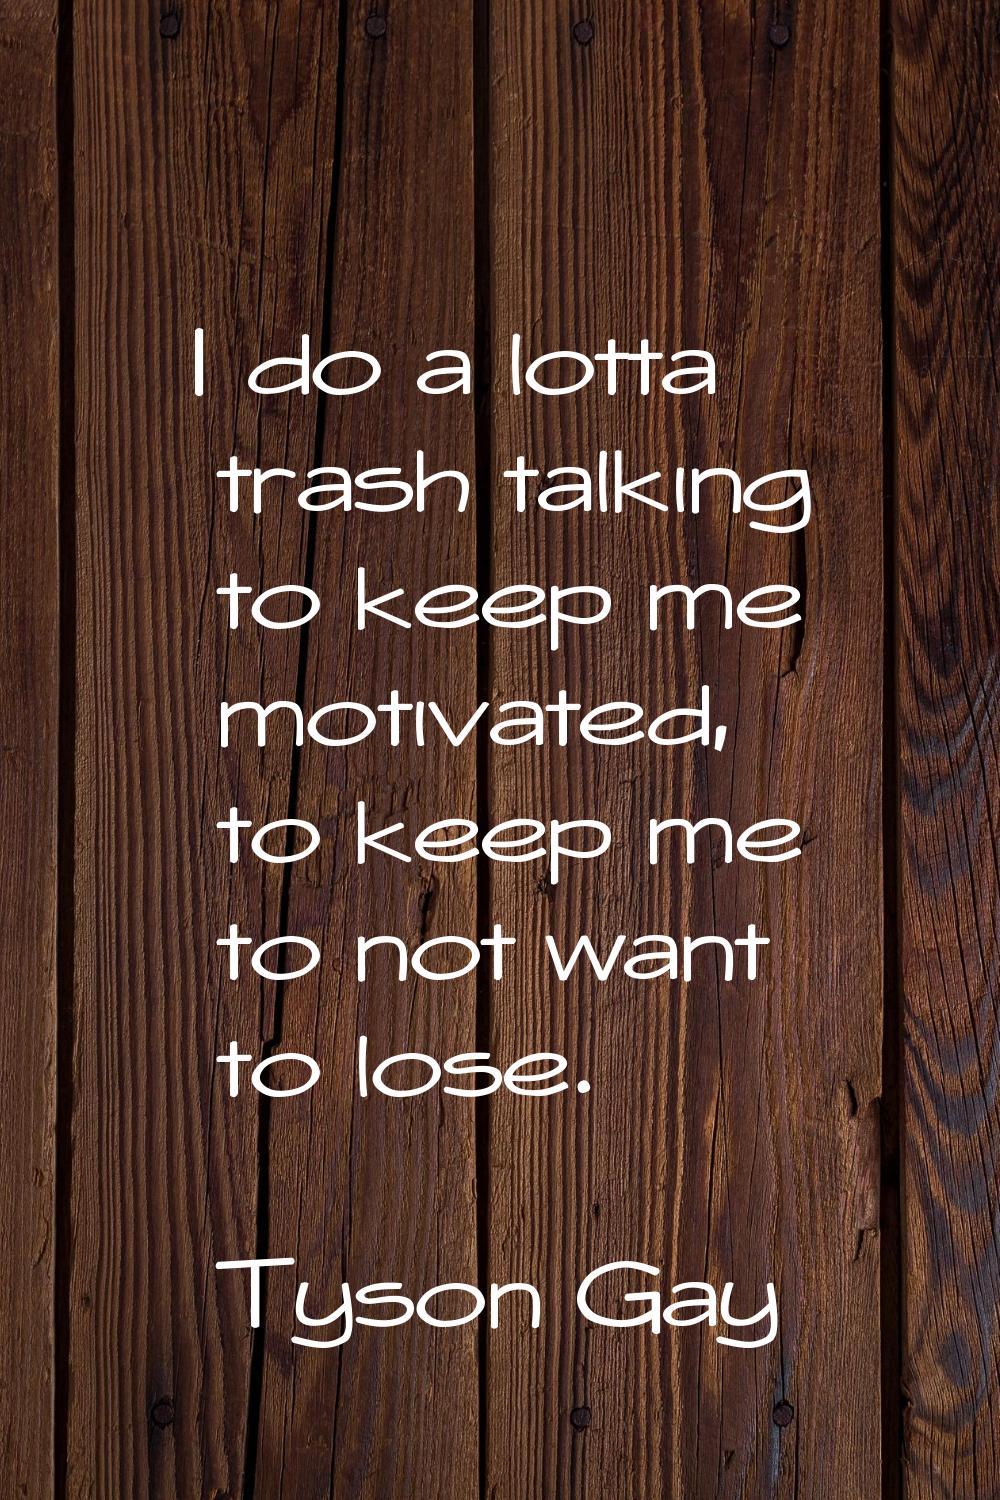 I do a lotta trash talking to keep me motivated, to keep me to not want to lose.